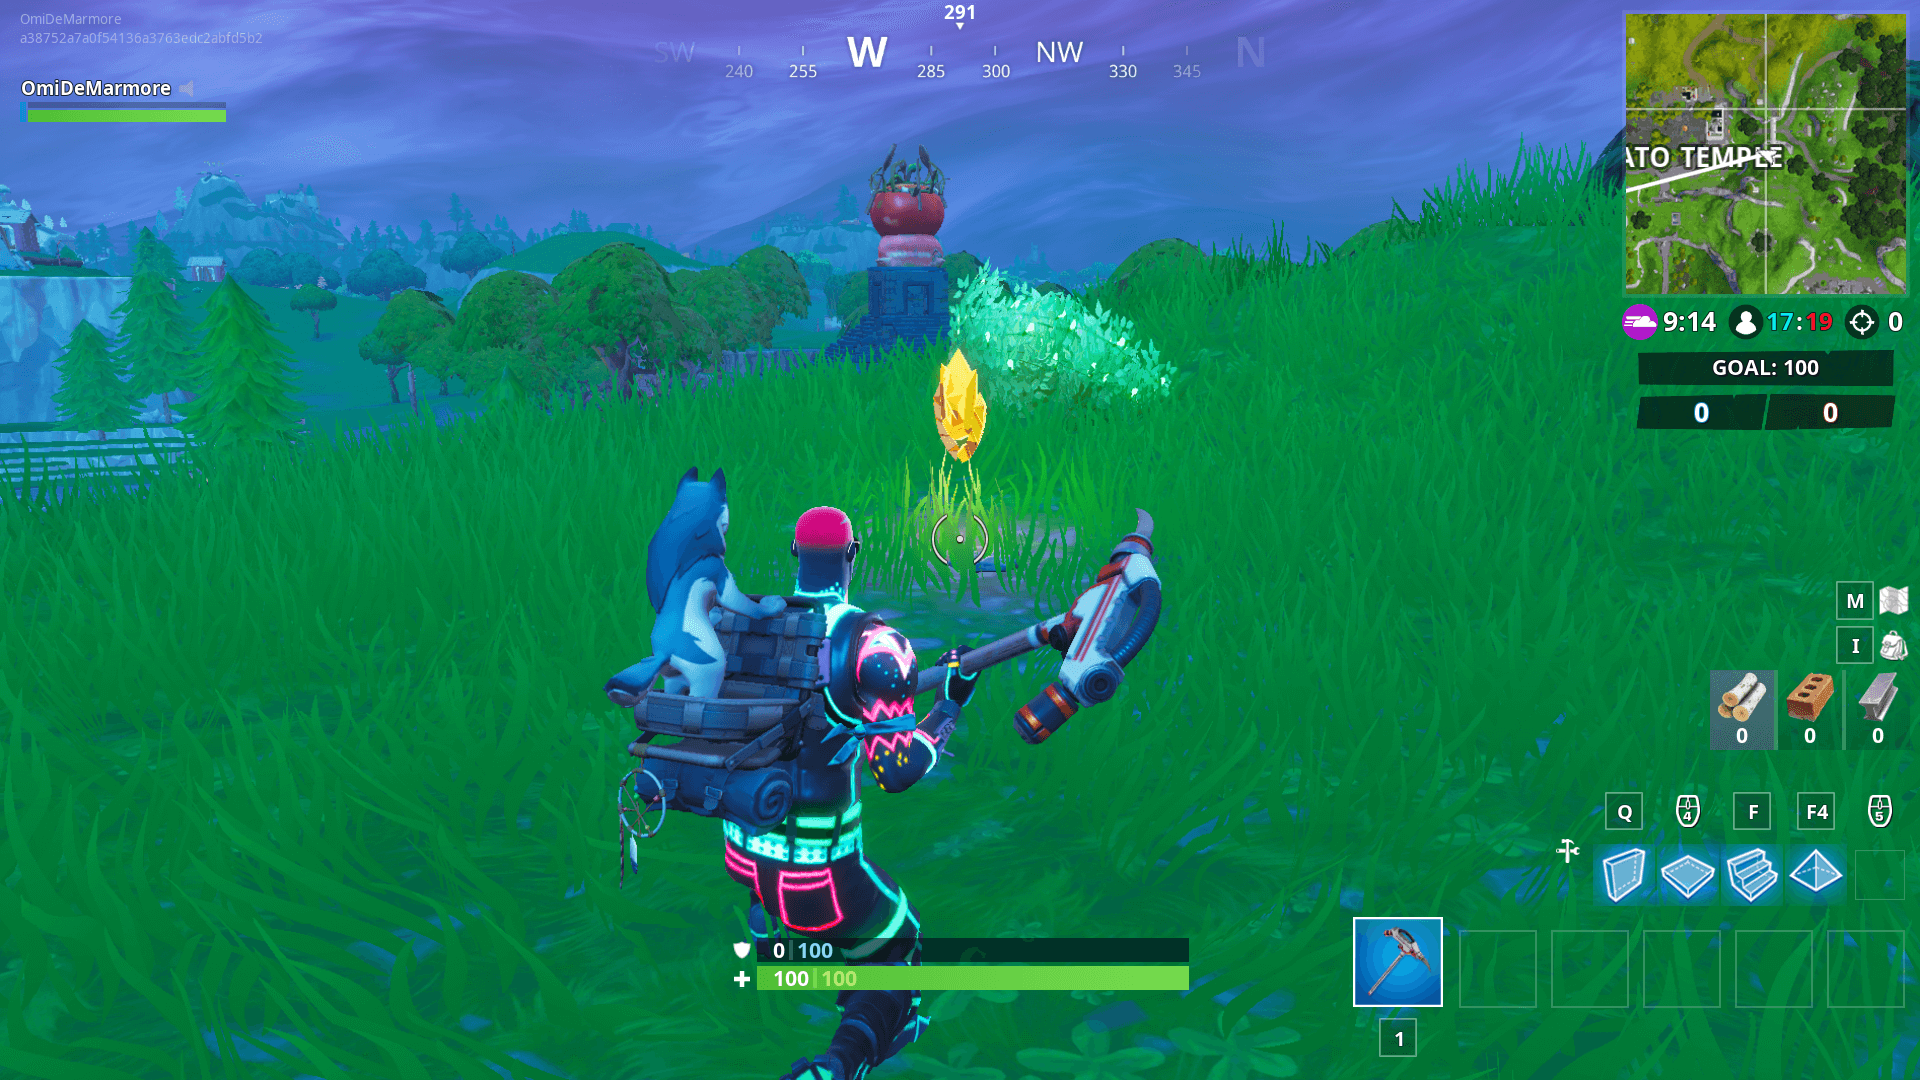 Search Between A Giant Rock Man Location Fortnite Fortnite Giant Rock Man Crowned Tomato And Encircled Tree Search Location Season 7 Dot Esports